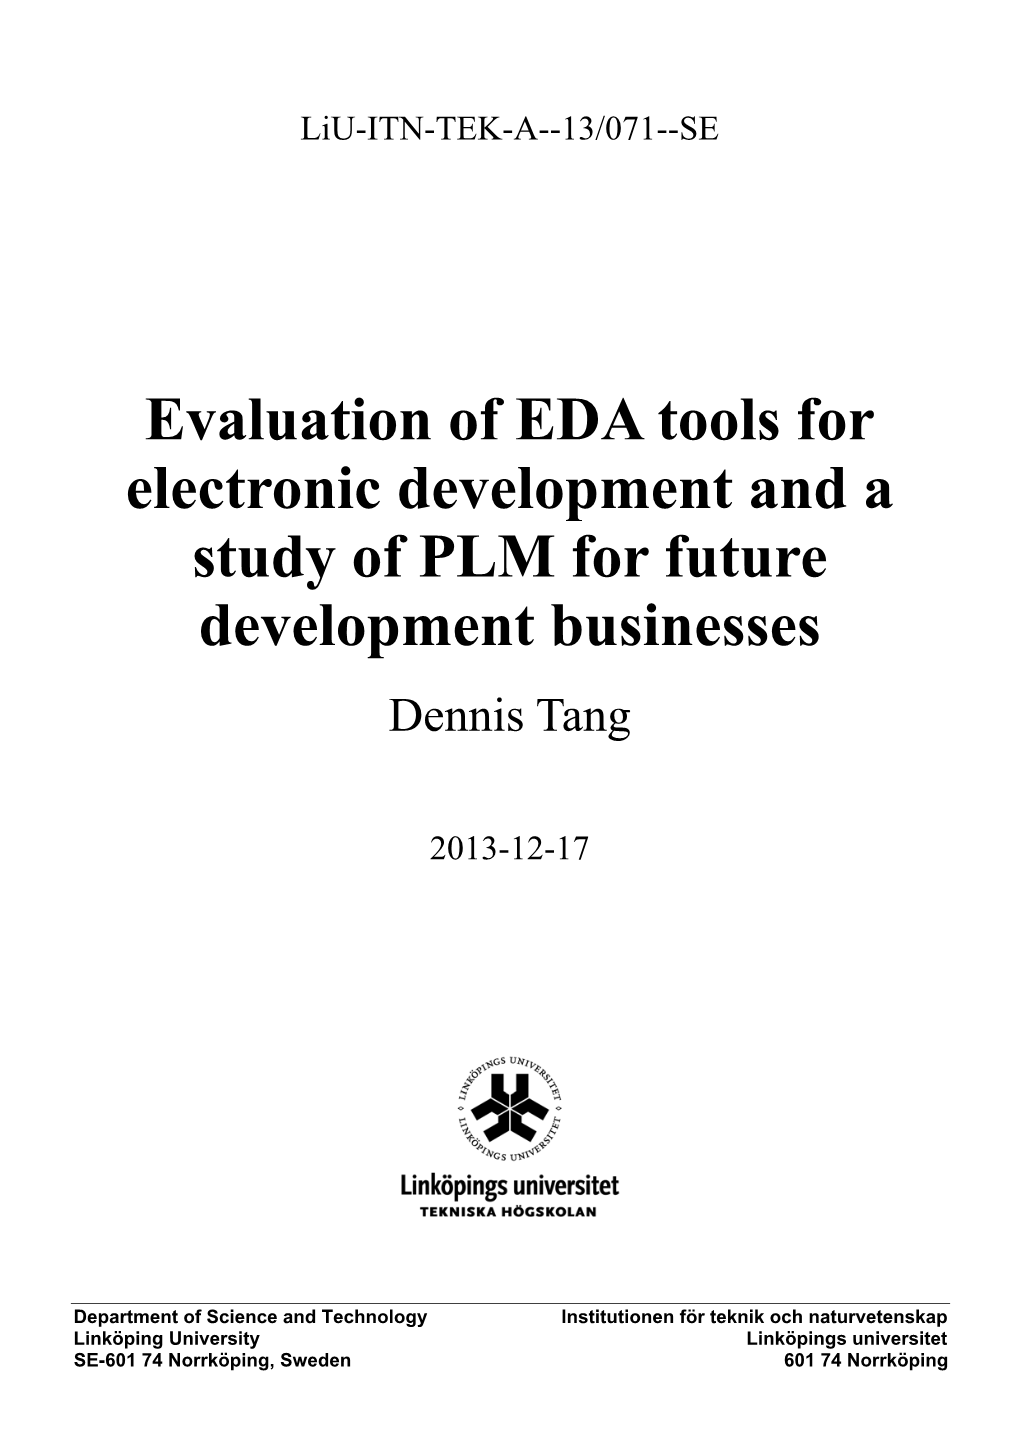 Evaluation of EDA Tools for Electronic Development and a Study of PLM for Future Development Businesses Dennis Tang